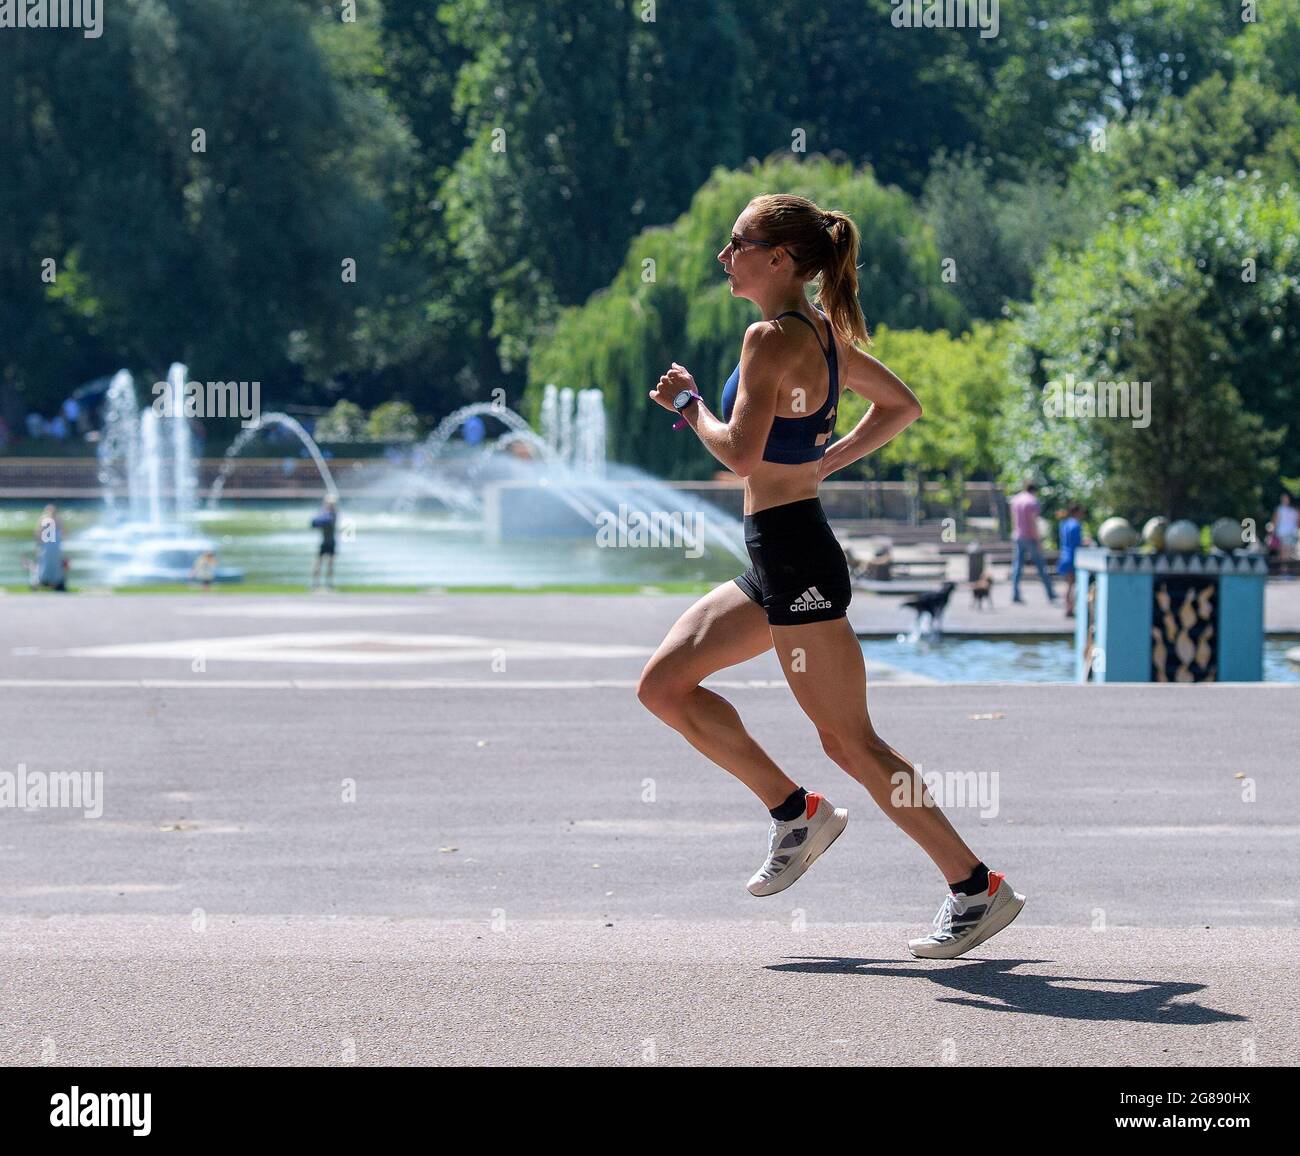 Battersea Park, United Kingdom. 18 July, 2021. Stephanie Davis Team GB Olympic Marathon runner trains in the sweltering heat at Battersea Park in preparation for the heat at the 2020 Tokyo Olympic Games. Credit: Nigel Bramley/Alamy Live News Stock Photo